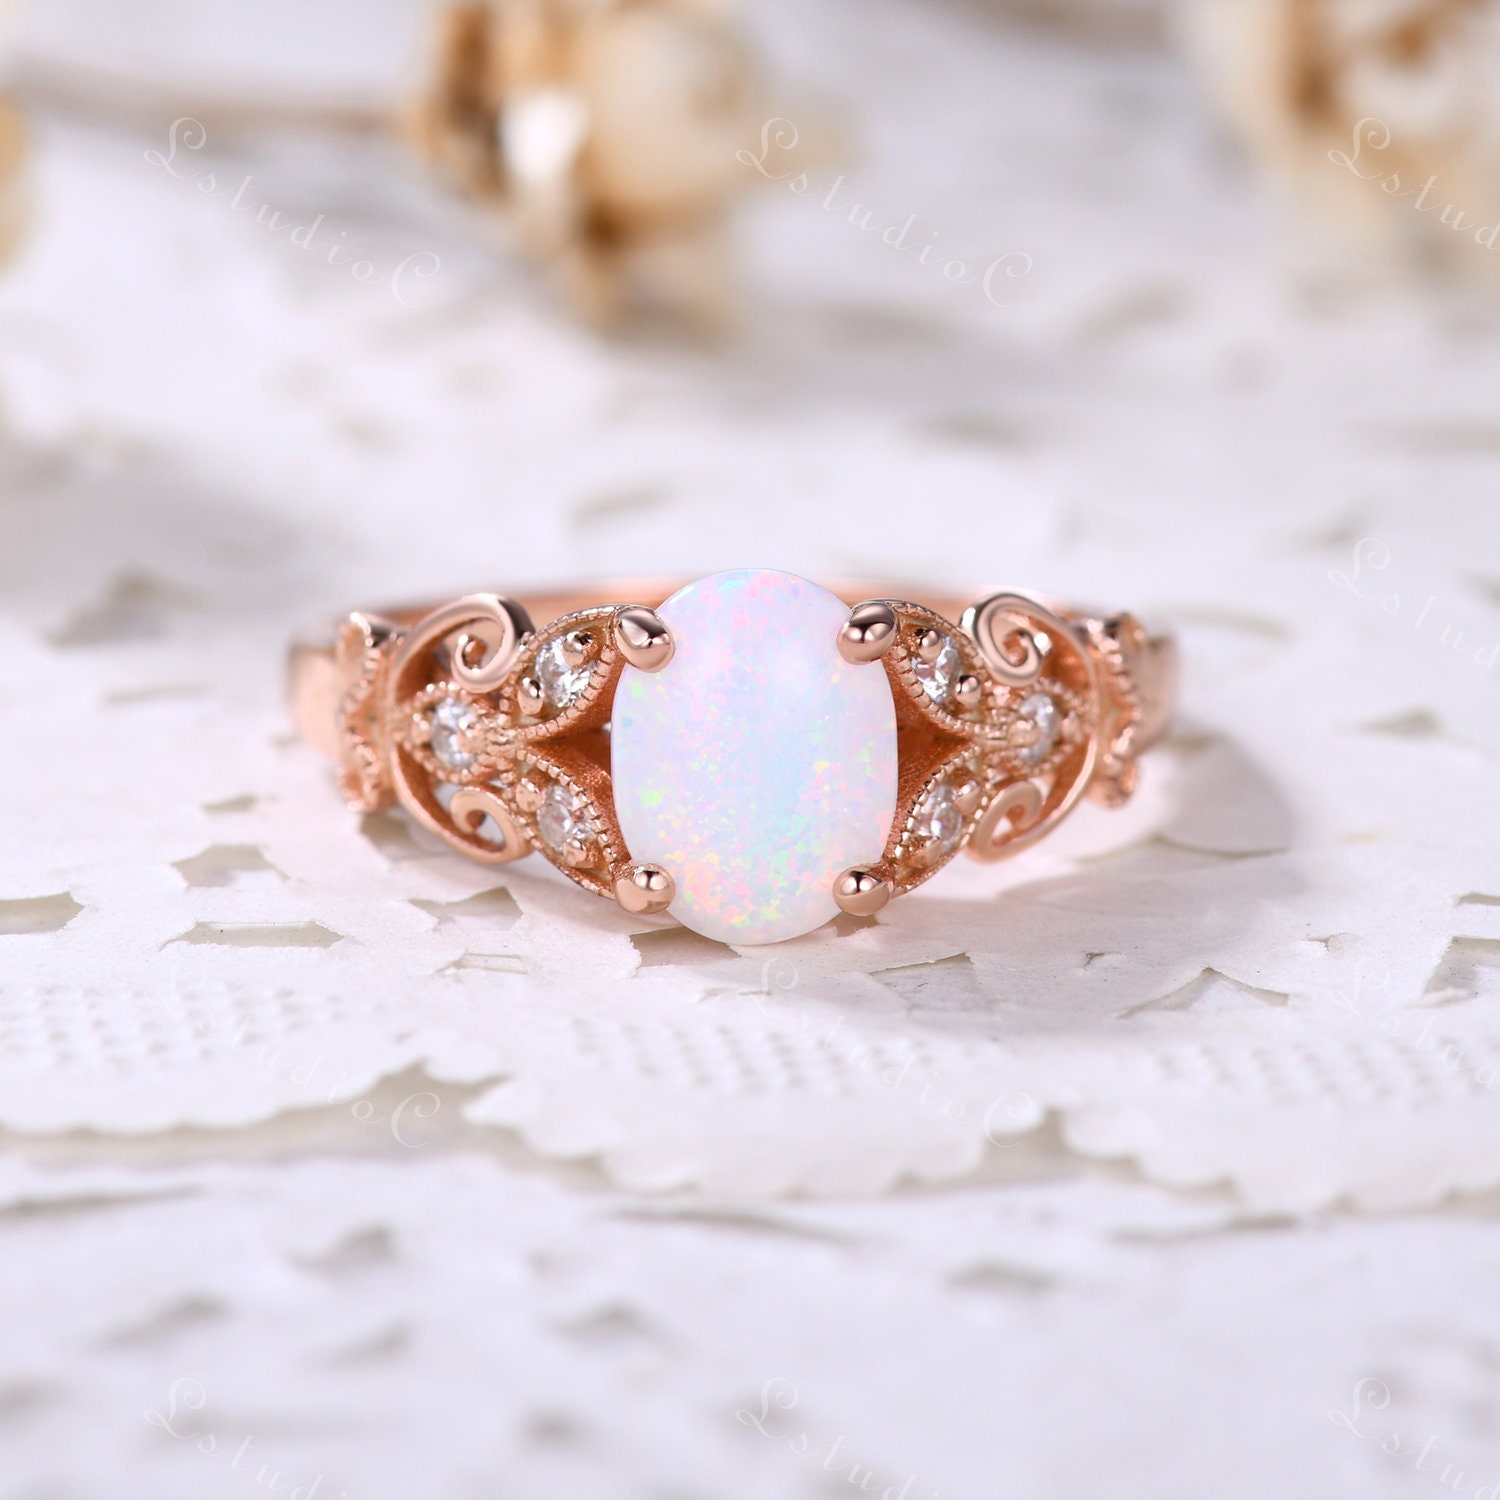 Silver Opal Ring Oval Cut 6x8mm Opal Ring 10k White Gold Ring Half Eternity Wedding Ring Promise Ring Opal Dainty Ring Antique Ring